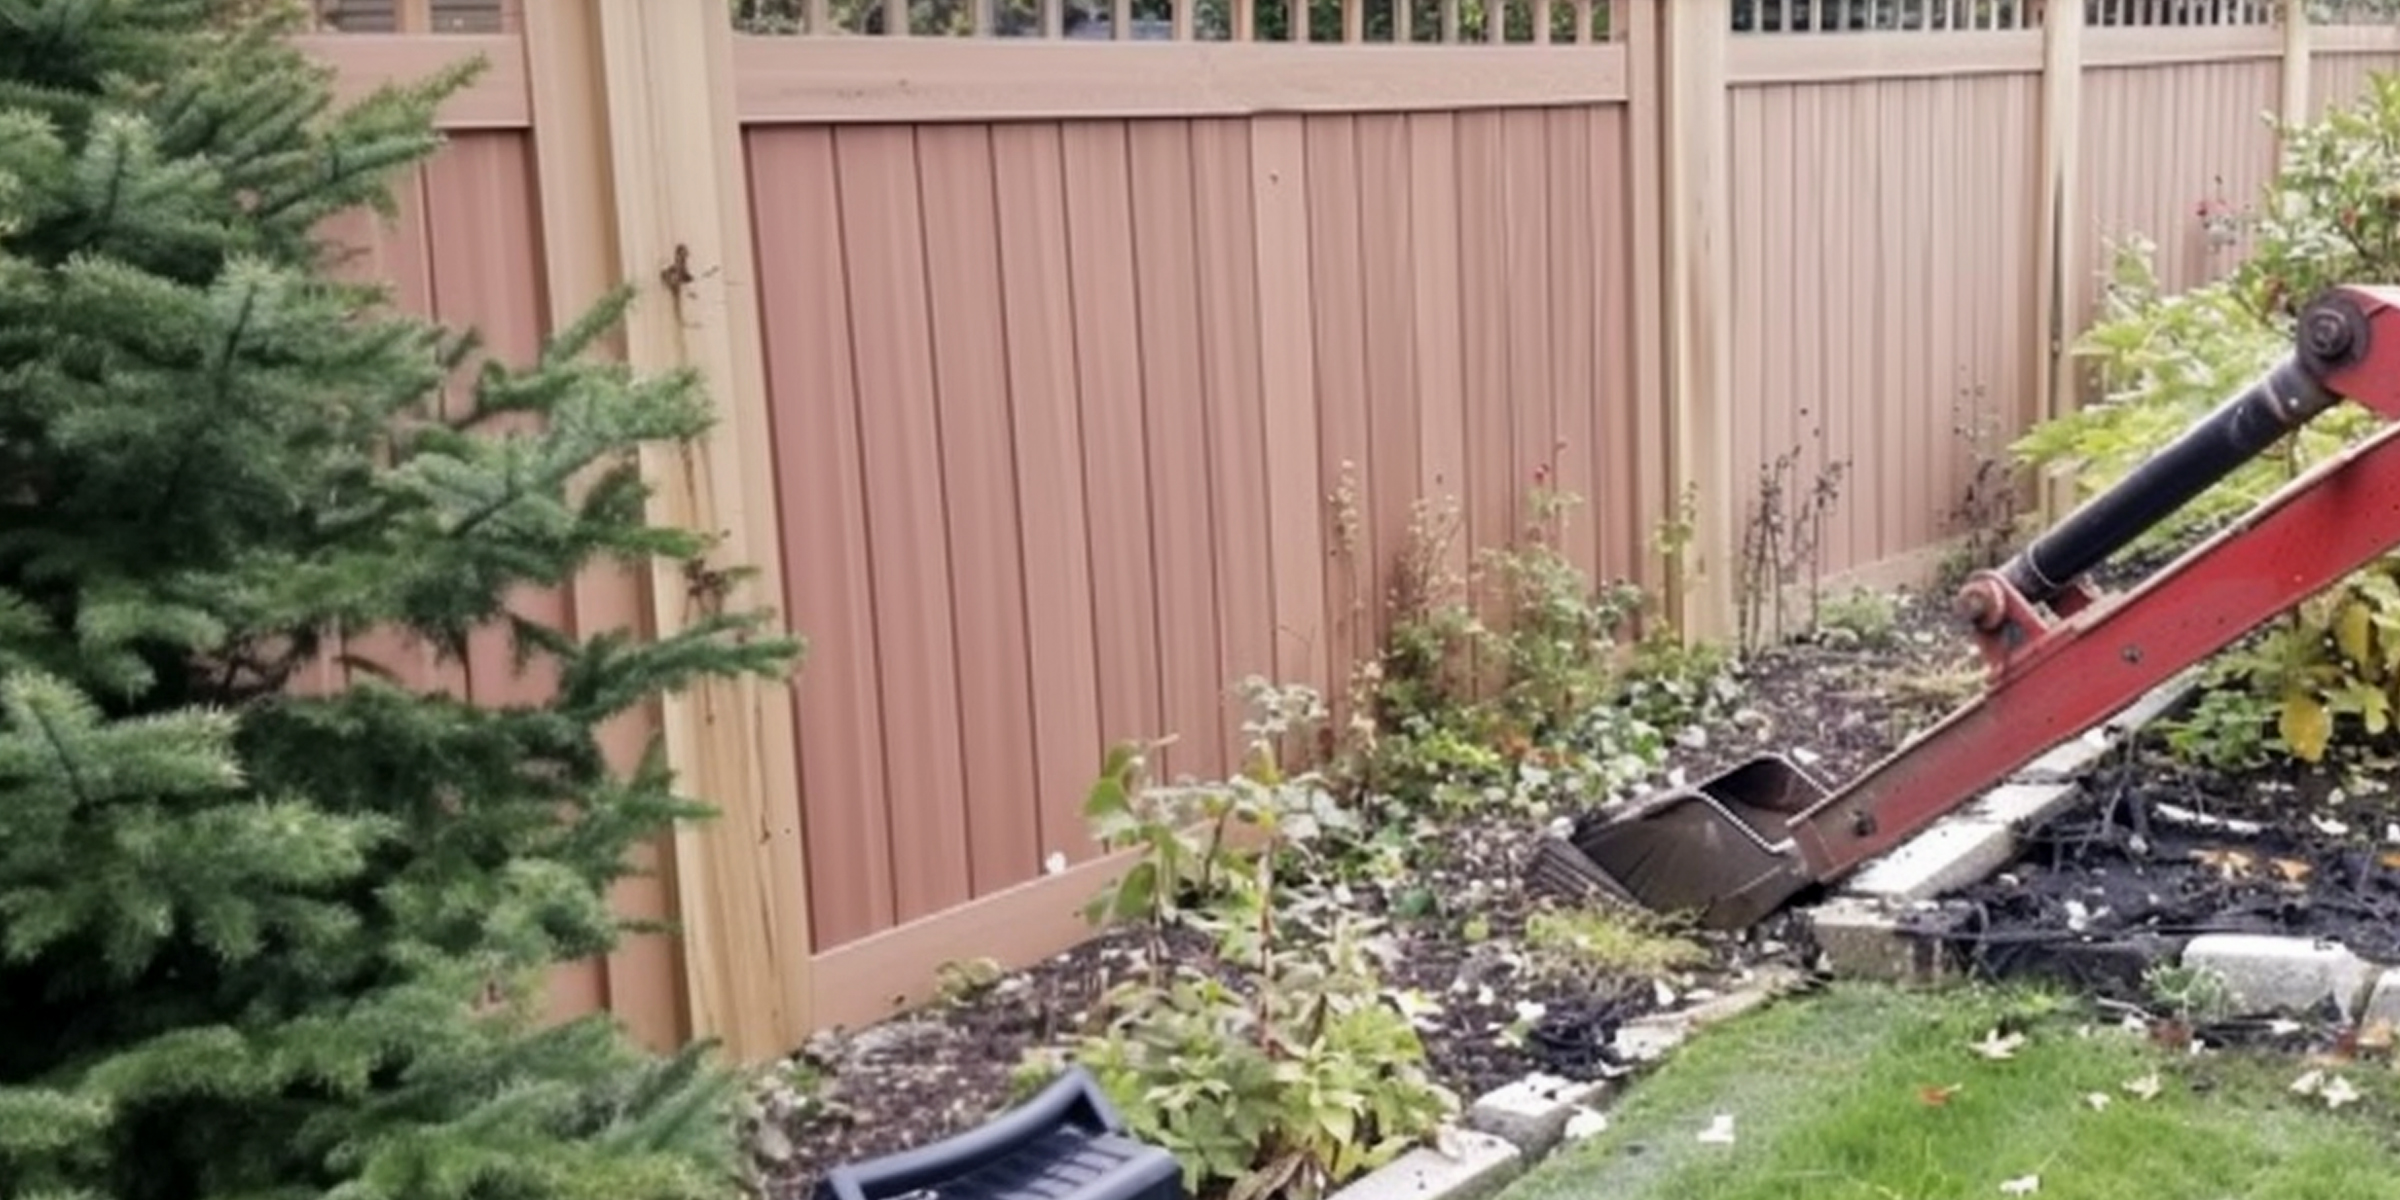 A machine working on a garden close to a wooden fence | Source: Amomama